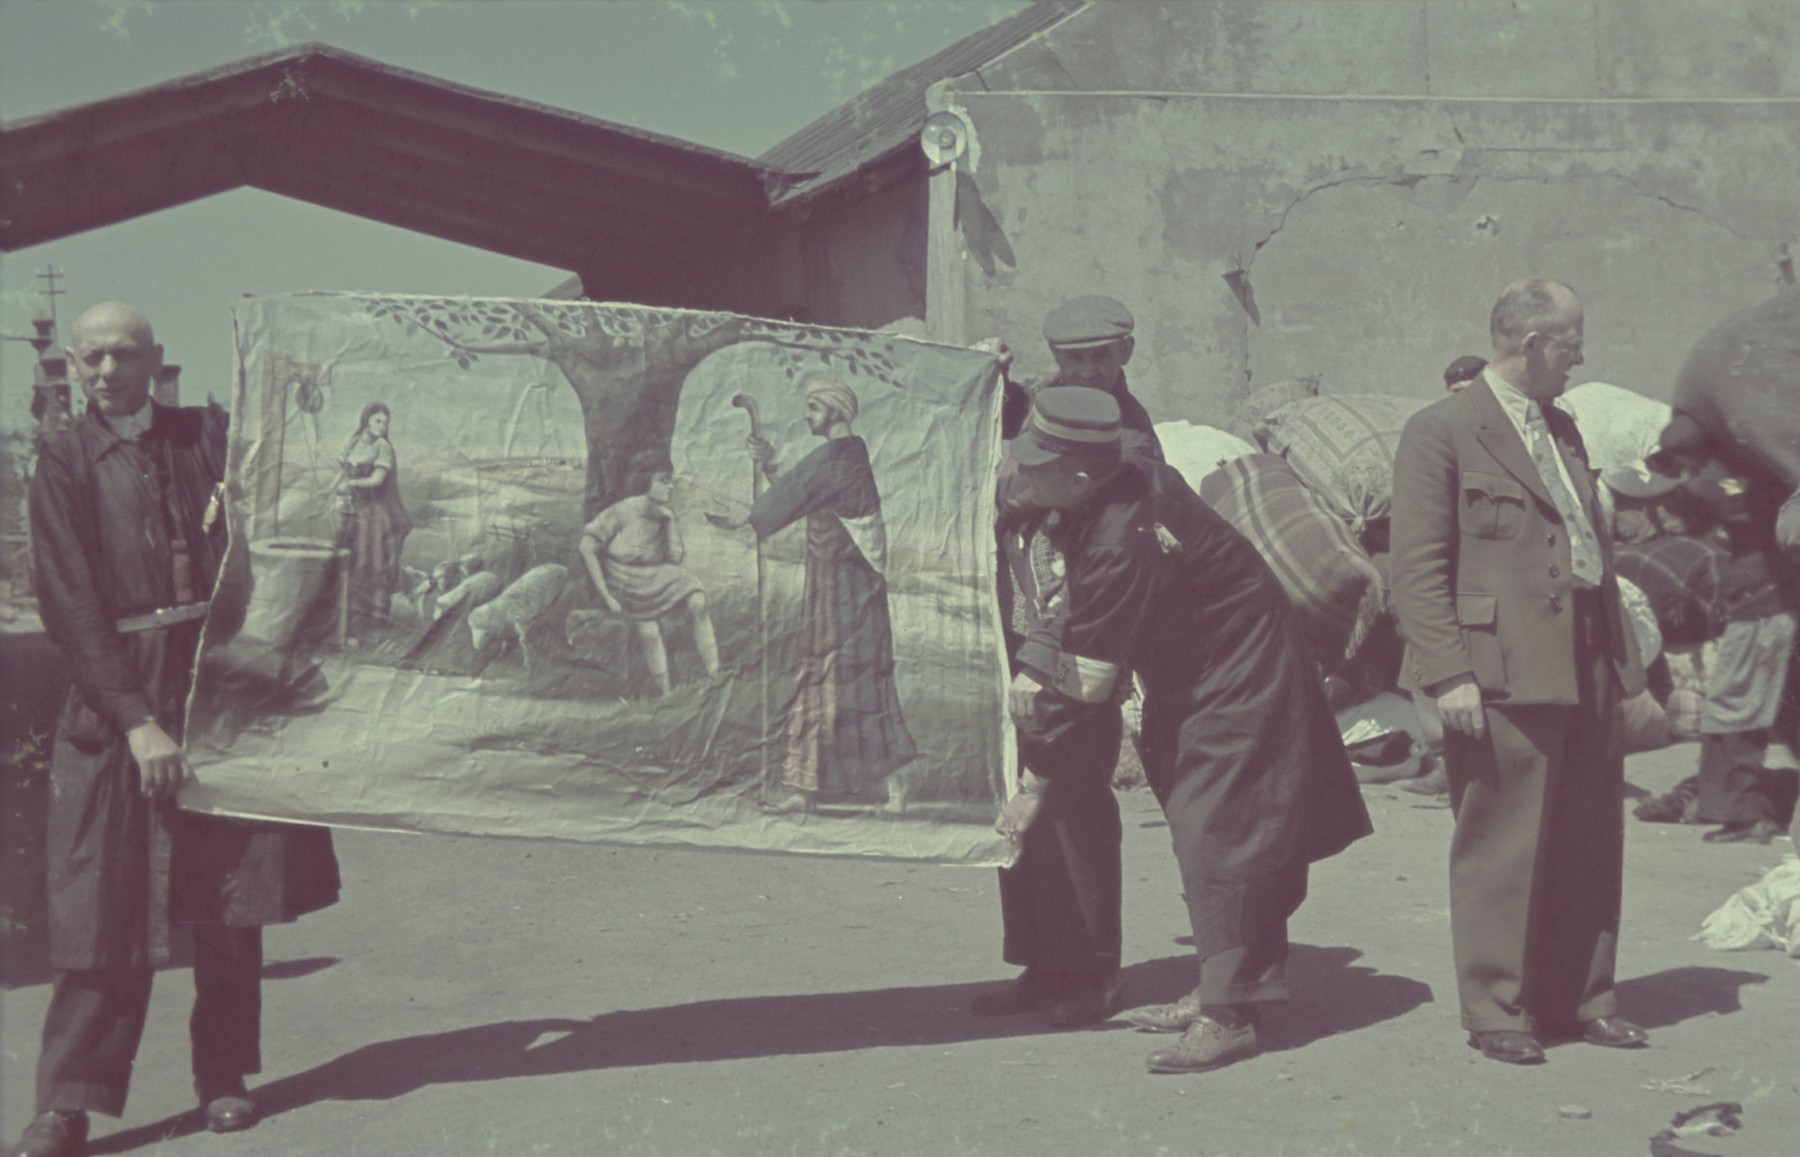 Jewish laborers display a confiscated work of art that was brought to the Pabianice labor camp/storage facility.

Original German caption: "Pabianice, Juedische Kunst" (Jewish art), #33.